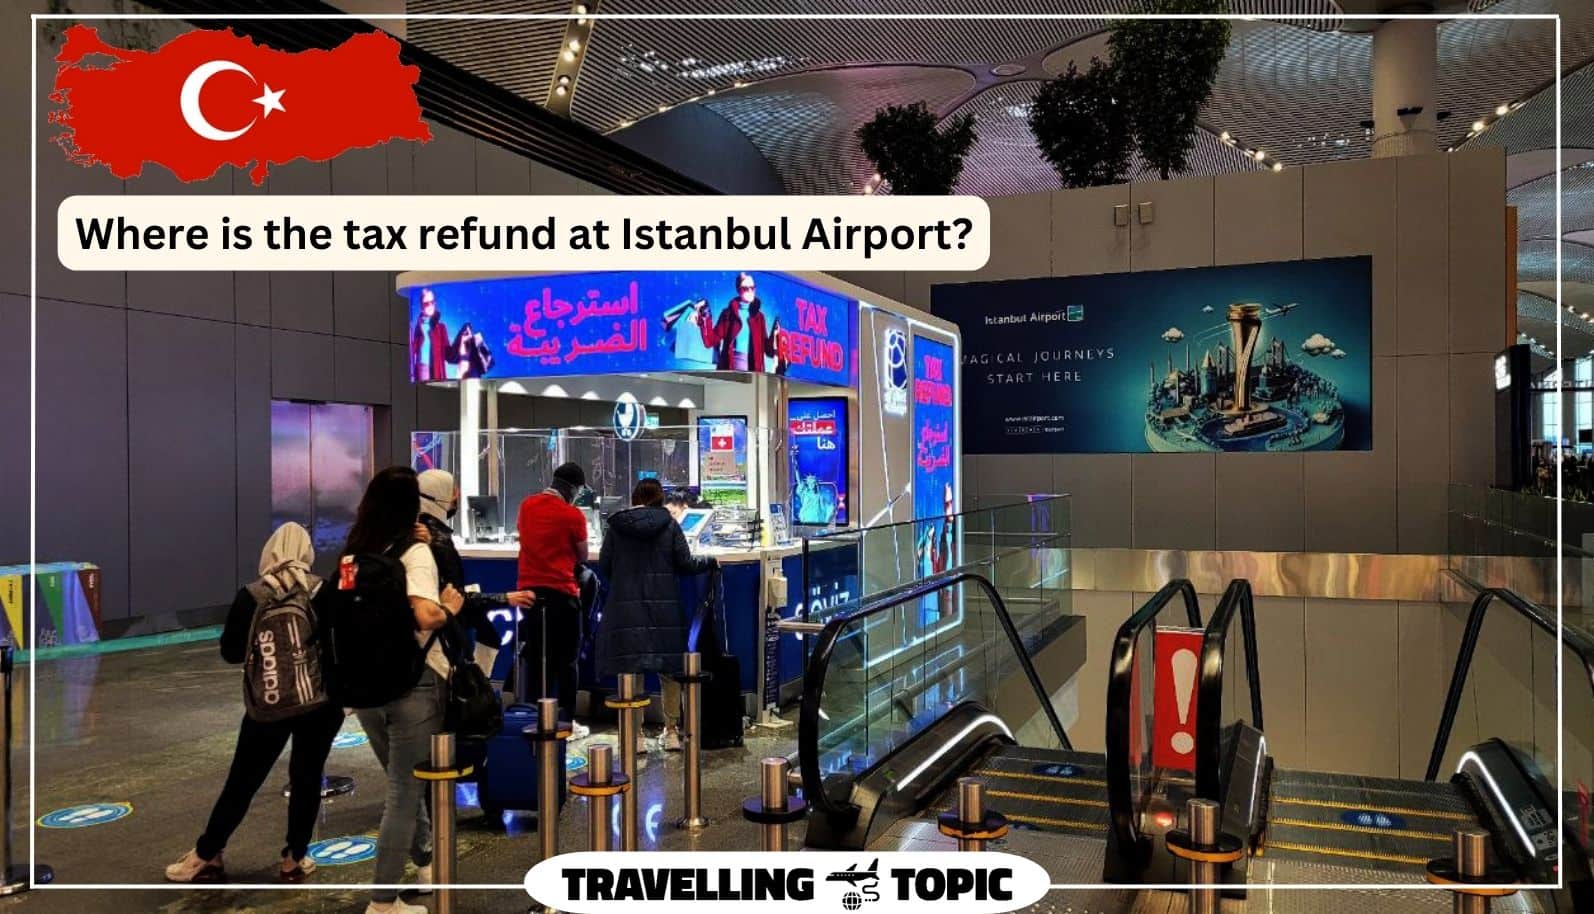 Where is the tax refund at Istanbul Airport?